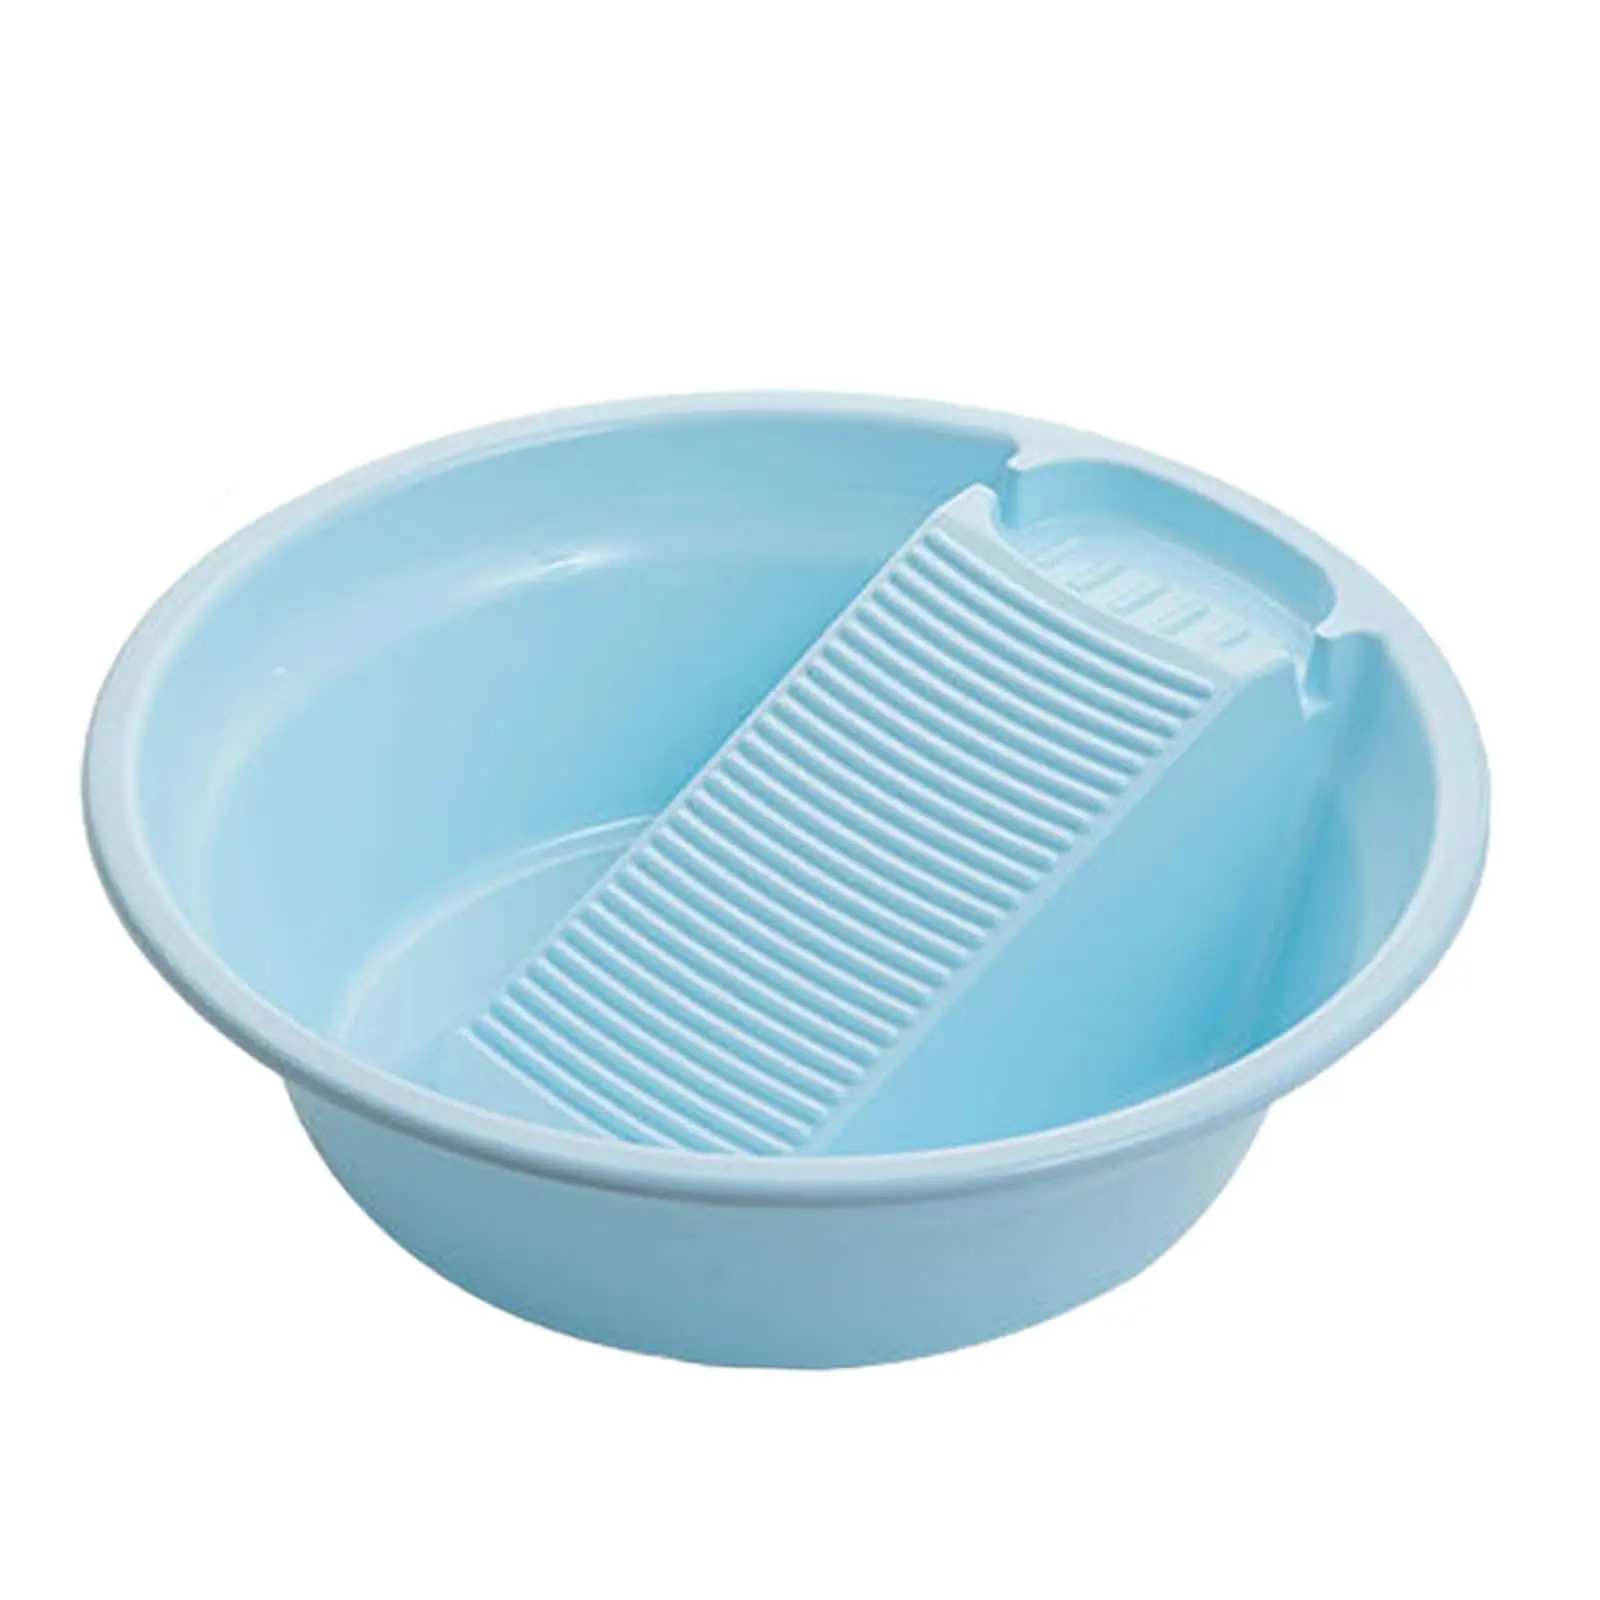 Washboard Basin Thickened Non Slip Basin for Laundry Integrated Laundry Washboard for Blouses Socks T Shirts Outdoor Bathroom